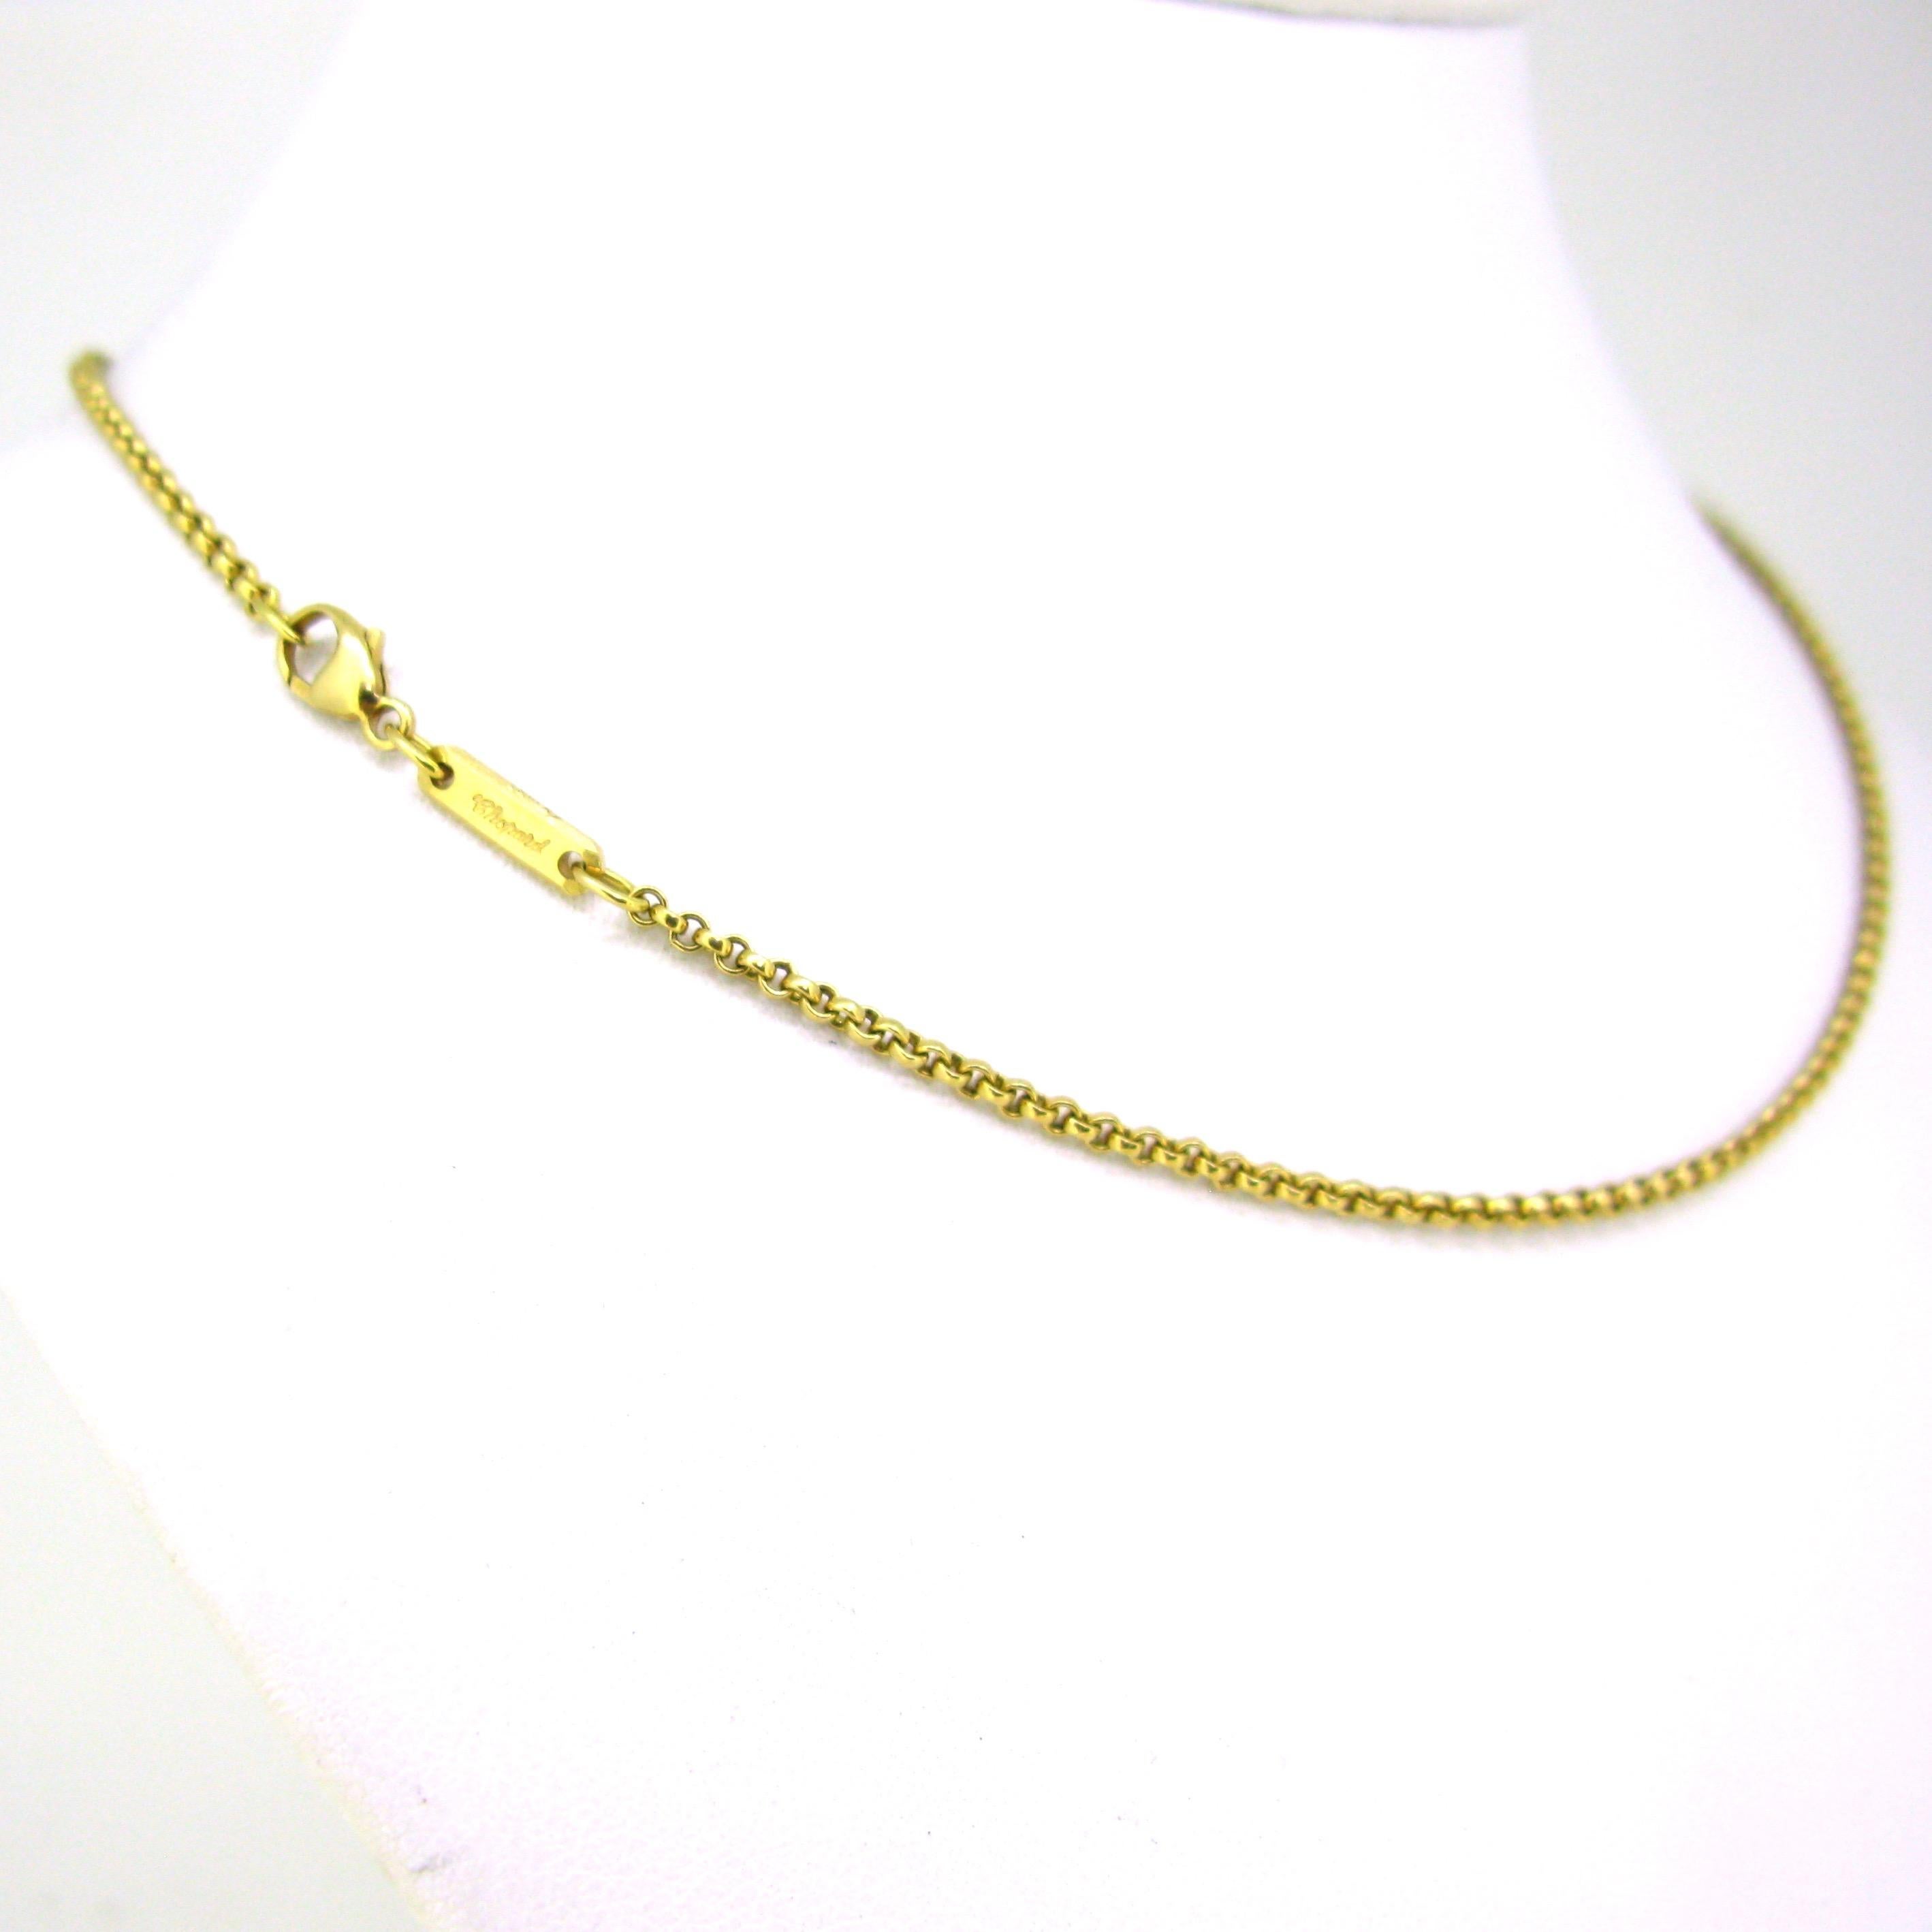 Modern Chopard Yellow Gold Chain Necklace